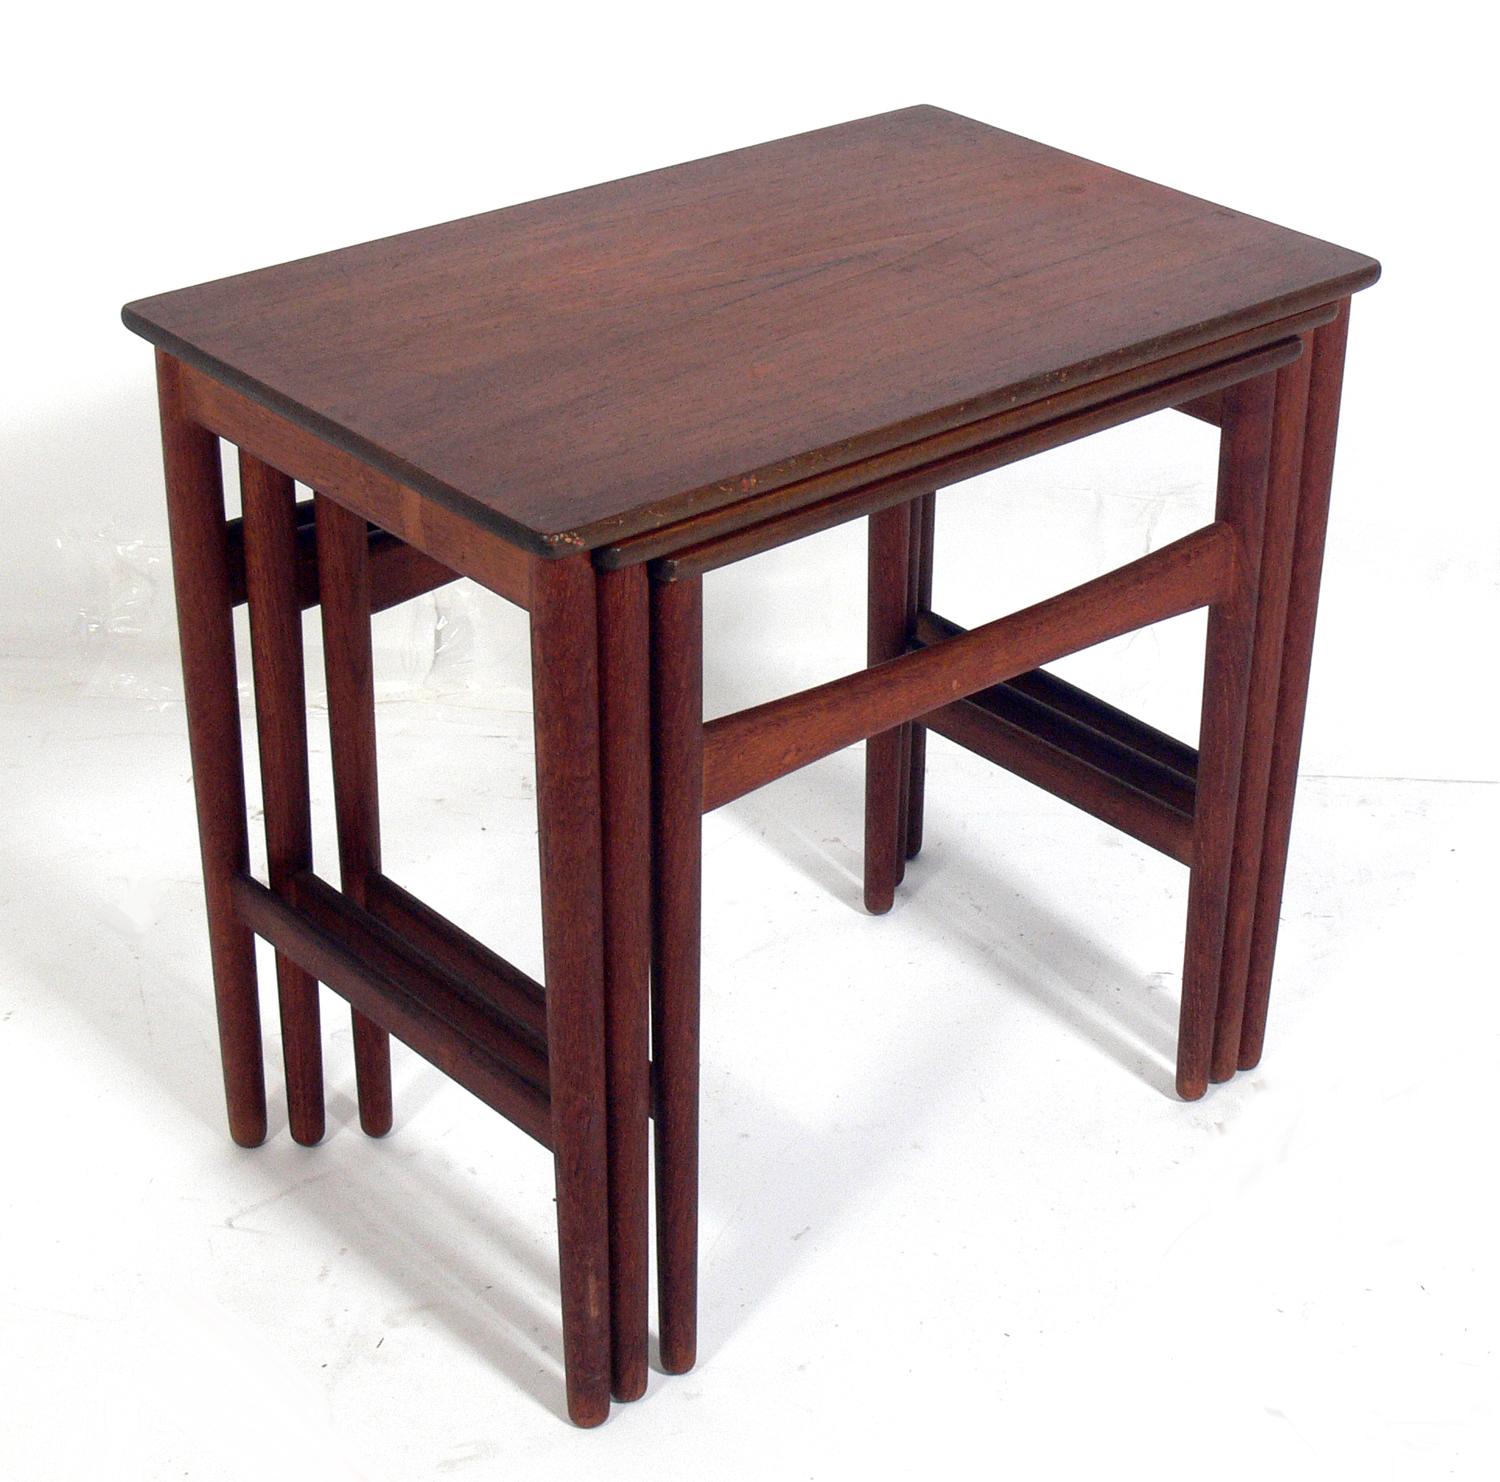 Danish modern teak nesting tables, designed by Hans Wegner for Andreas Tuck, Denmark, circa 1960s. They have been cleaned and Danish oiled.